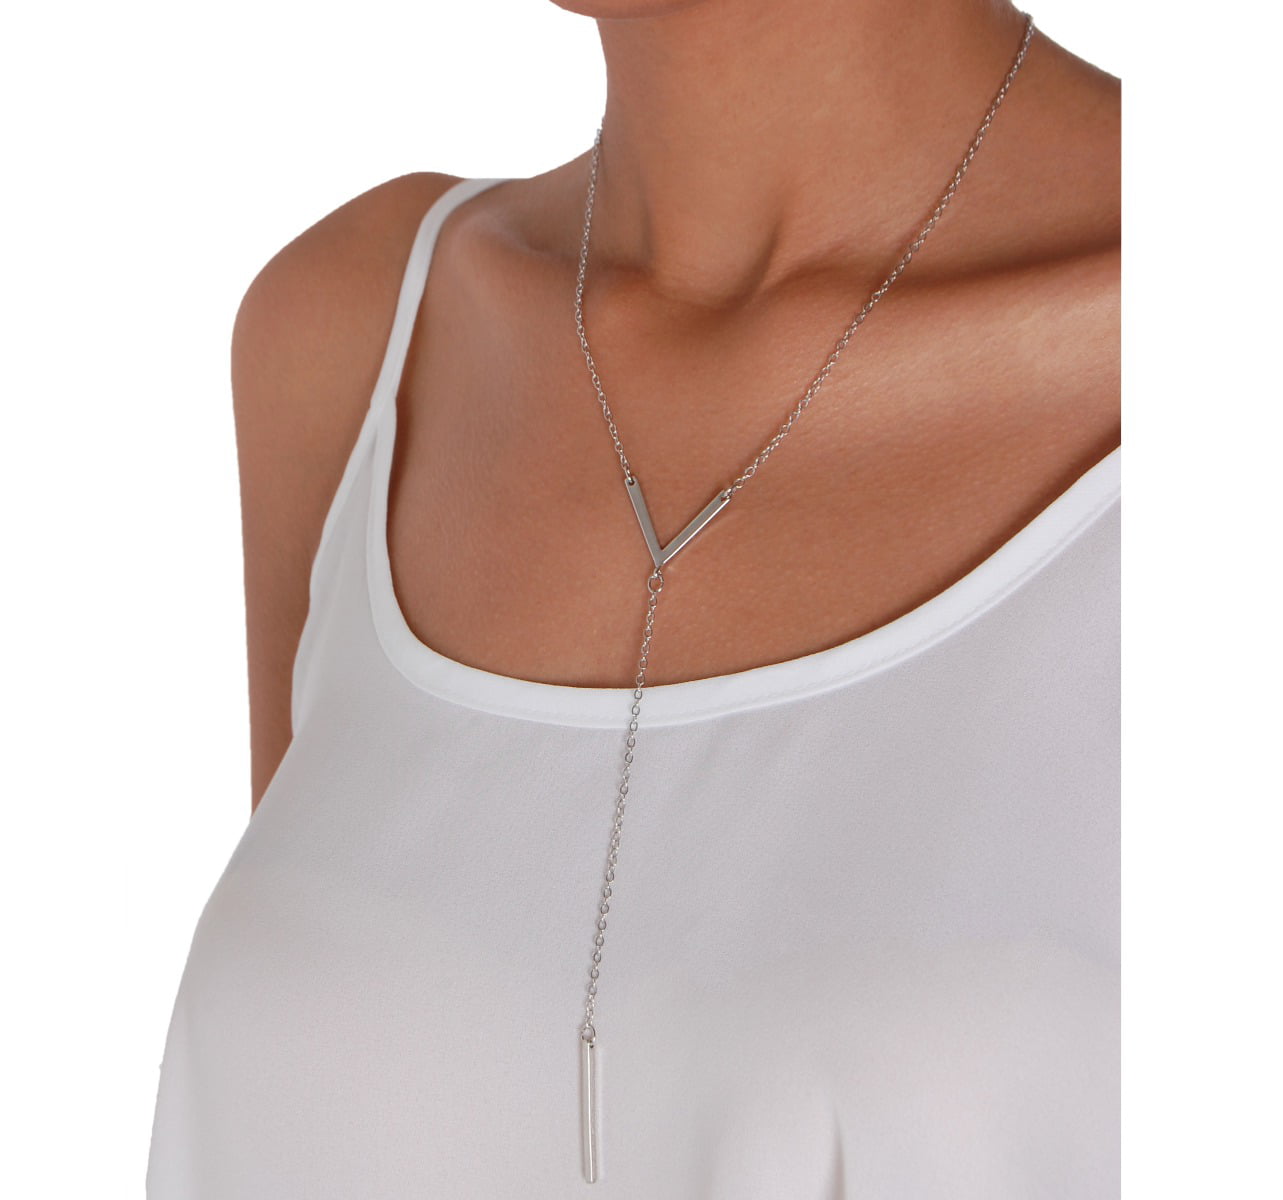 Humble Chic Womens Y-Chain Bar Necklace Adjustable Long Thin Delicate Chevron Choker Lariat 